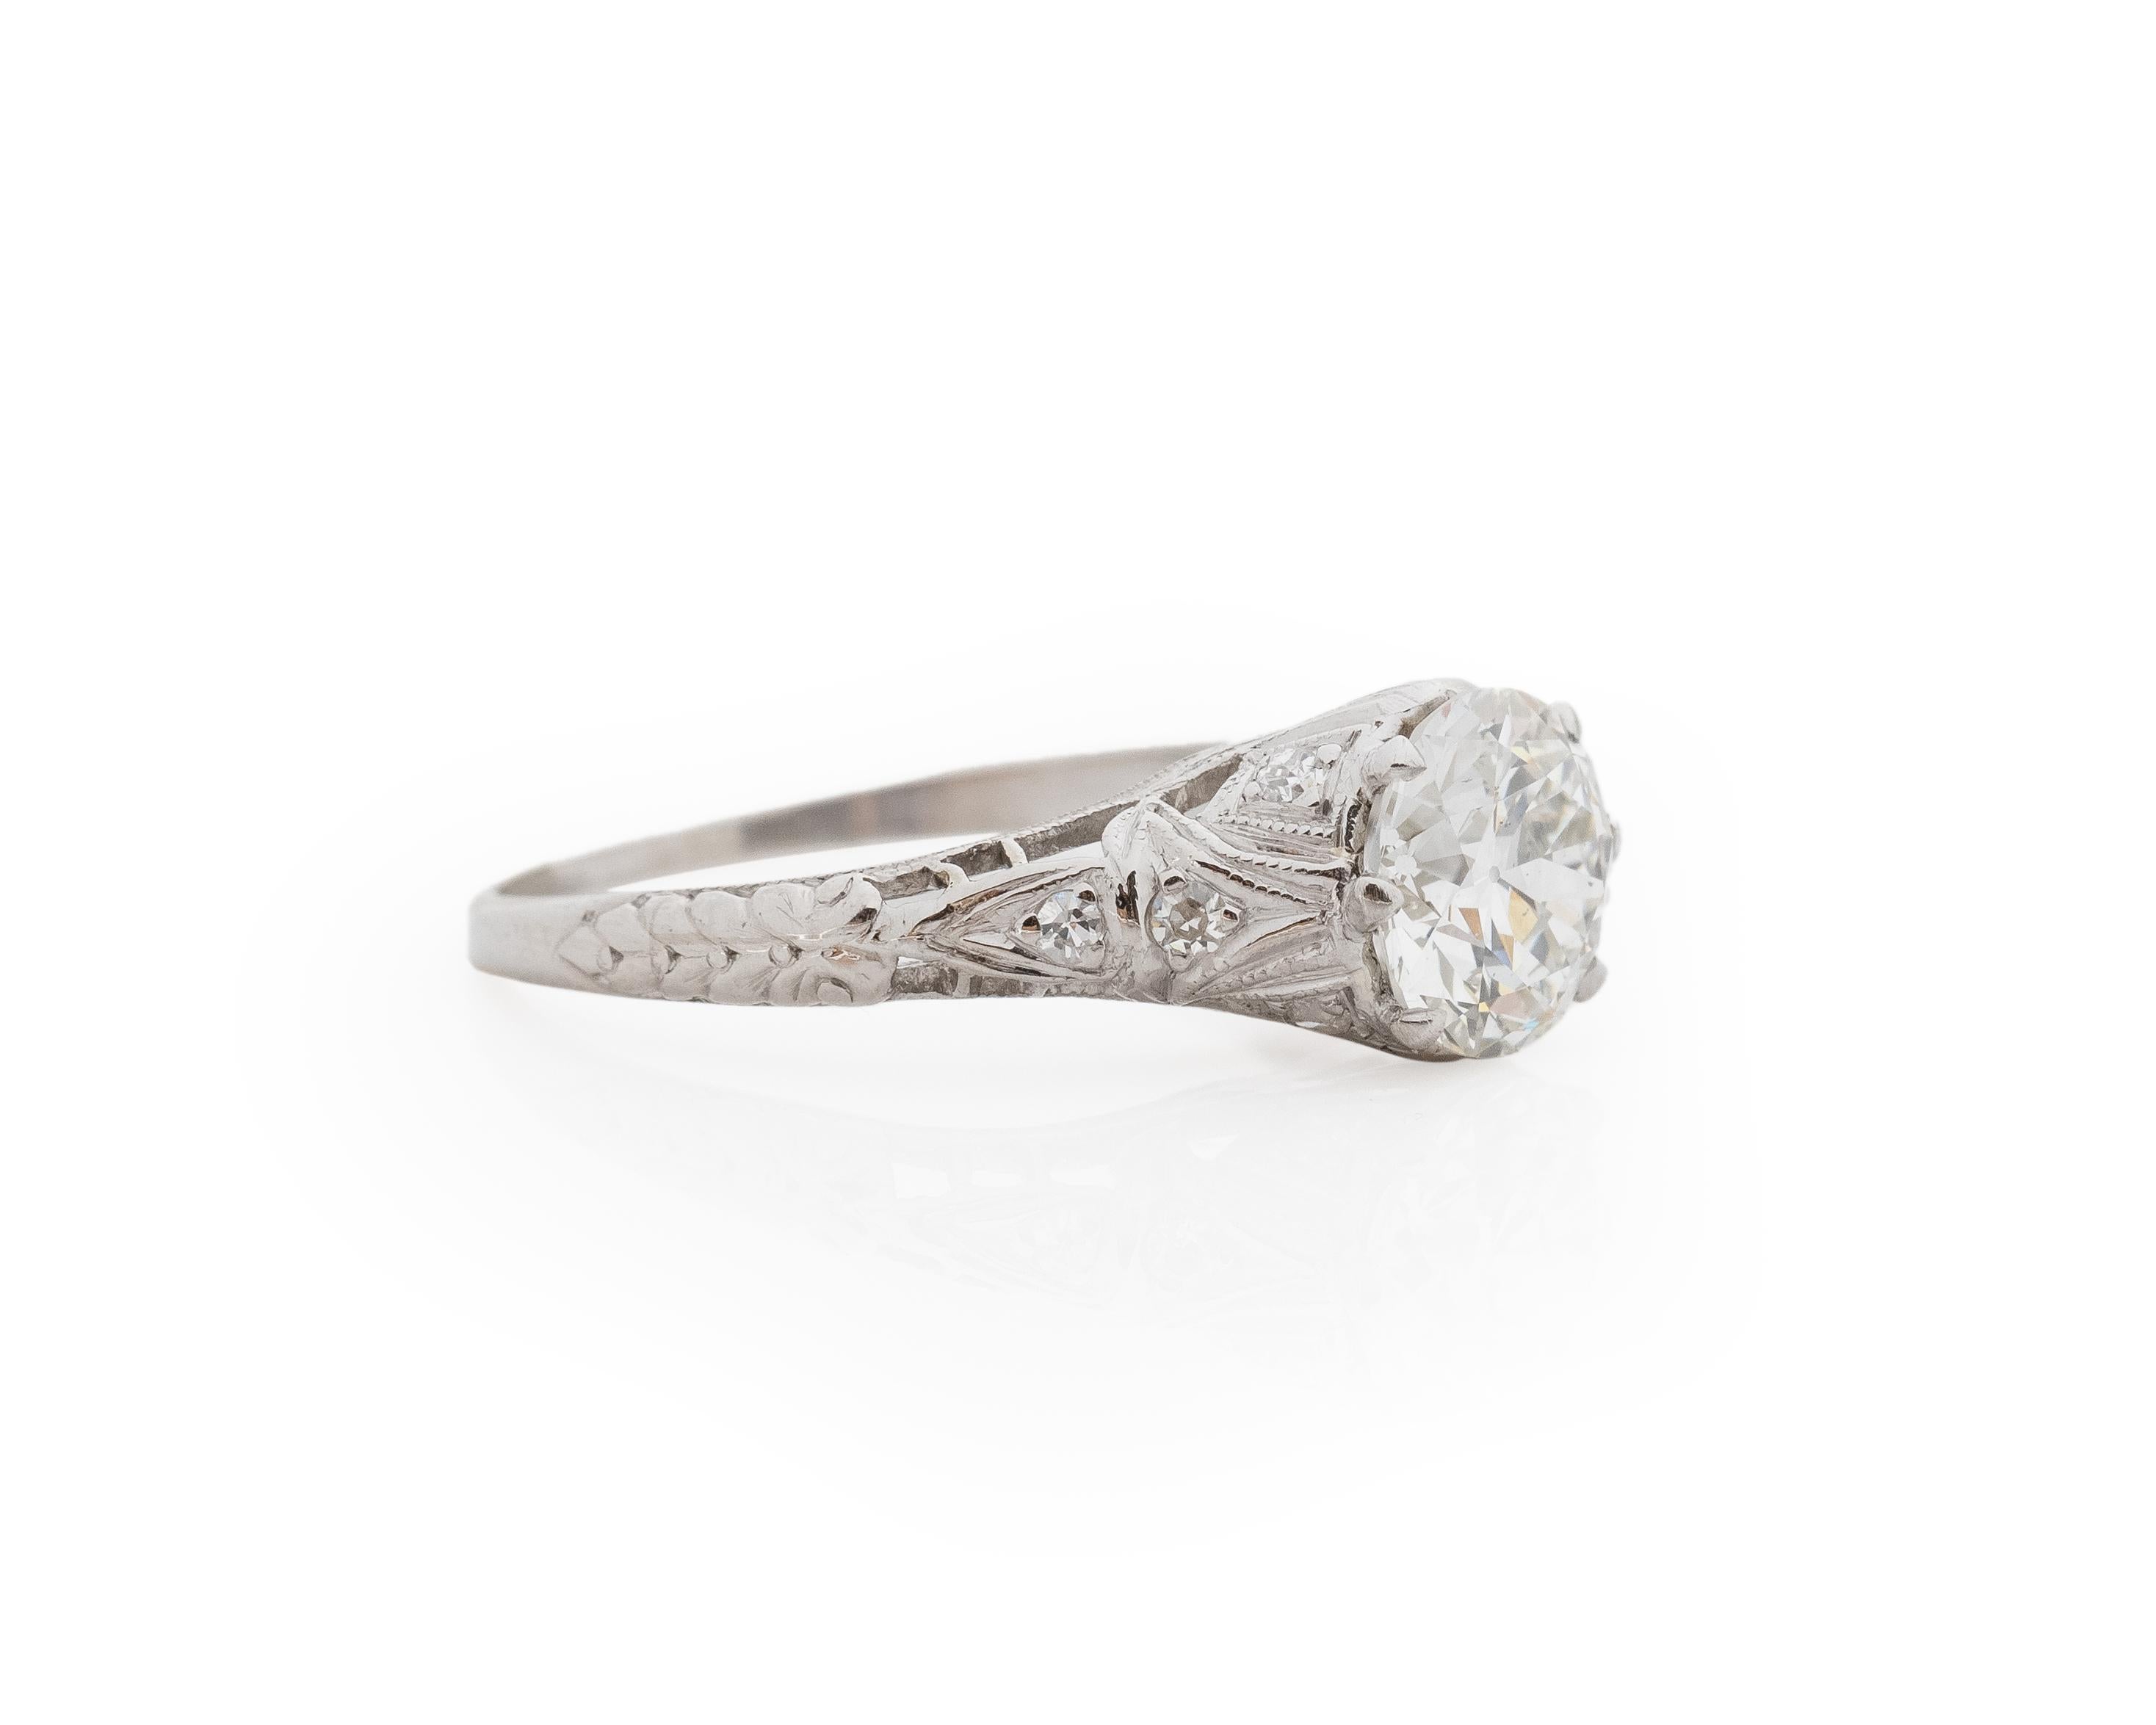 Year: 1920s

Item Details:
Ring Size: 6.75
Metal Type:  Platinum [Hallmarked, and Tested]
Weight:  3.1 grams

Center Diamond Details:

GIA Report#:7235142675
Weight: 1.37ct total weight
Cut: Old European brilliant
Color: I
Clarity: SI1
Type: